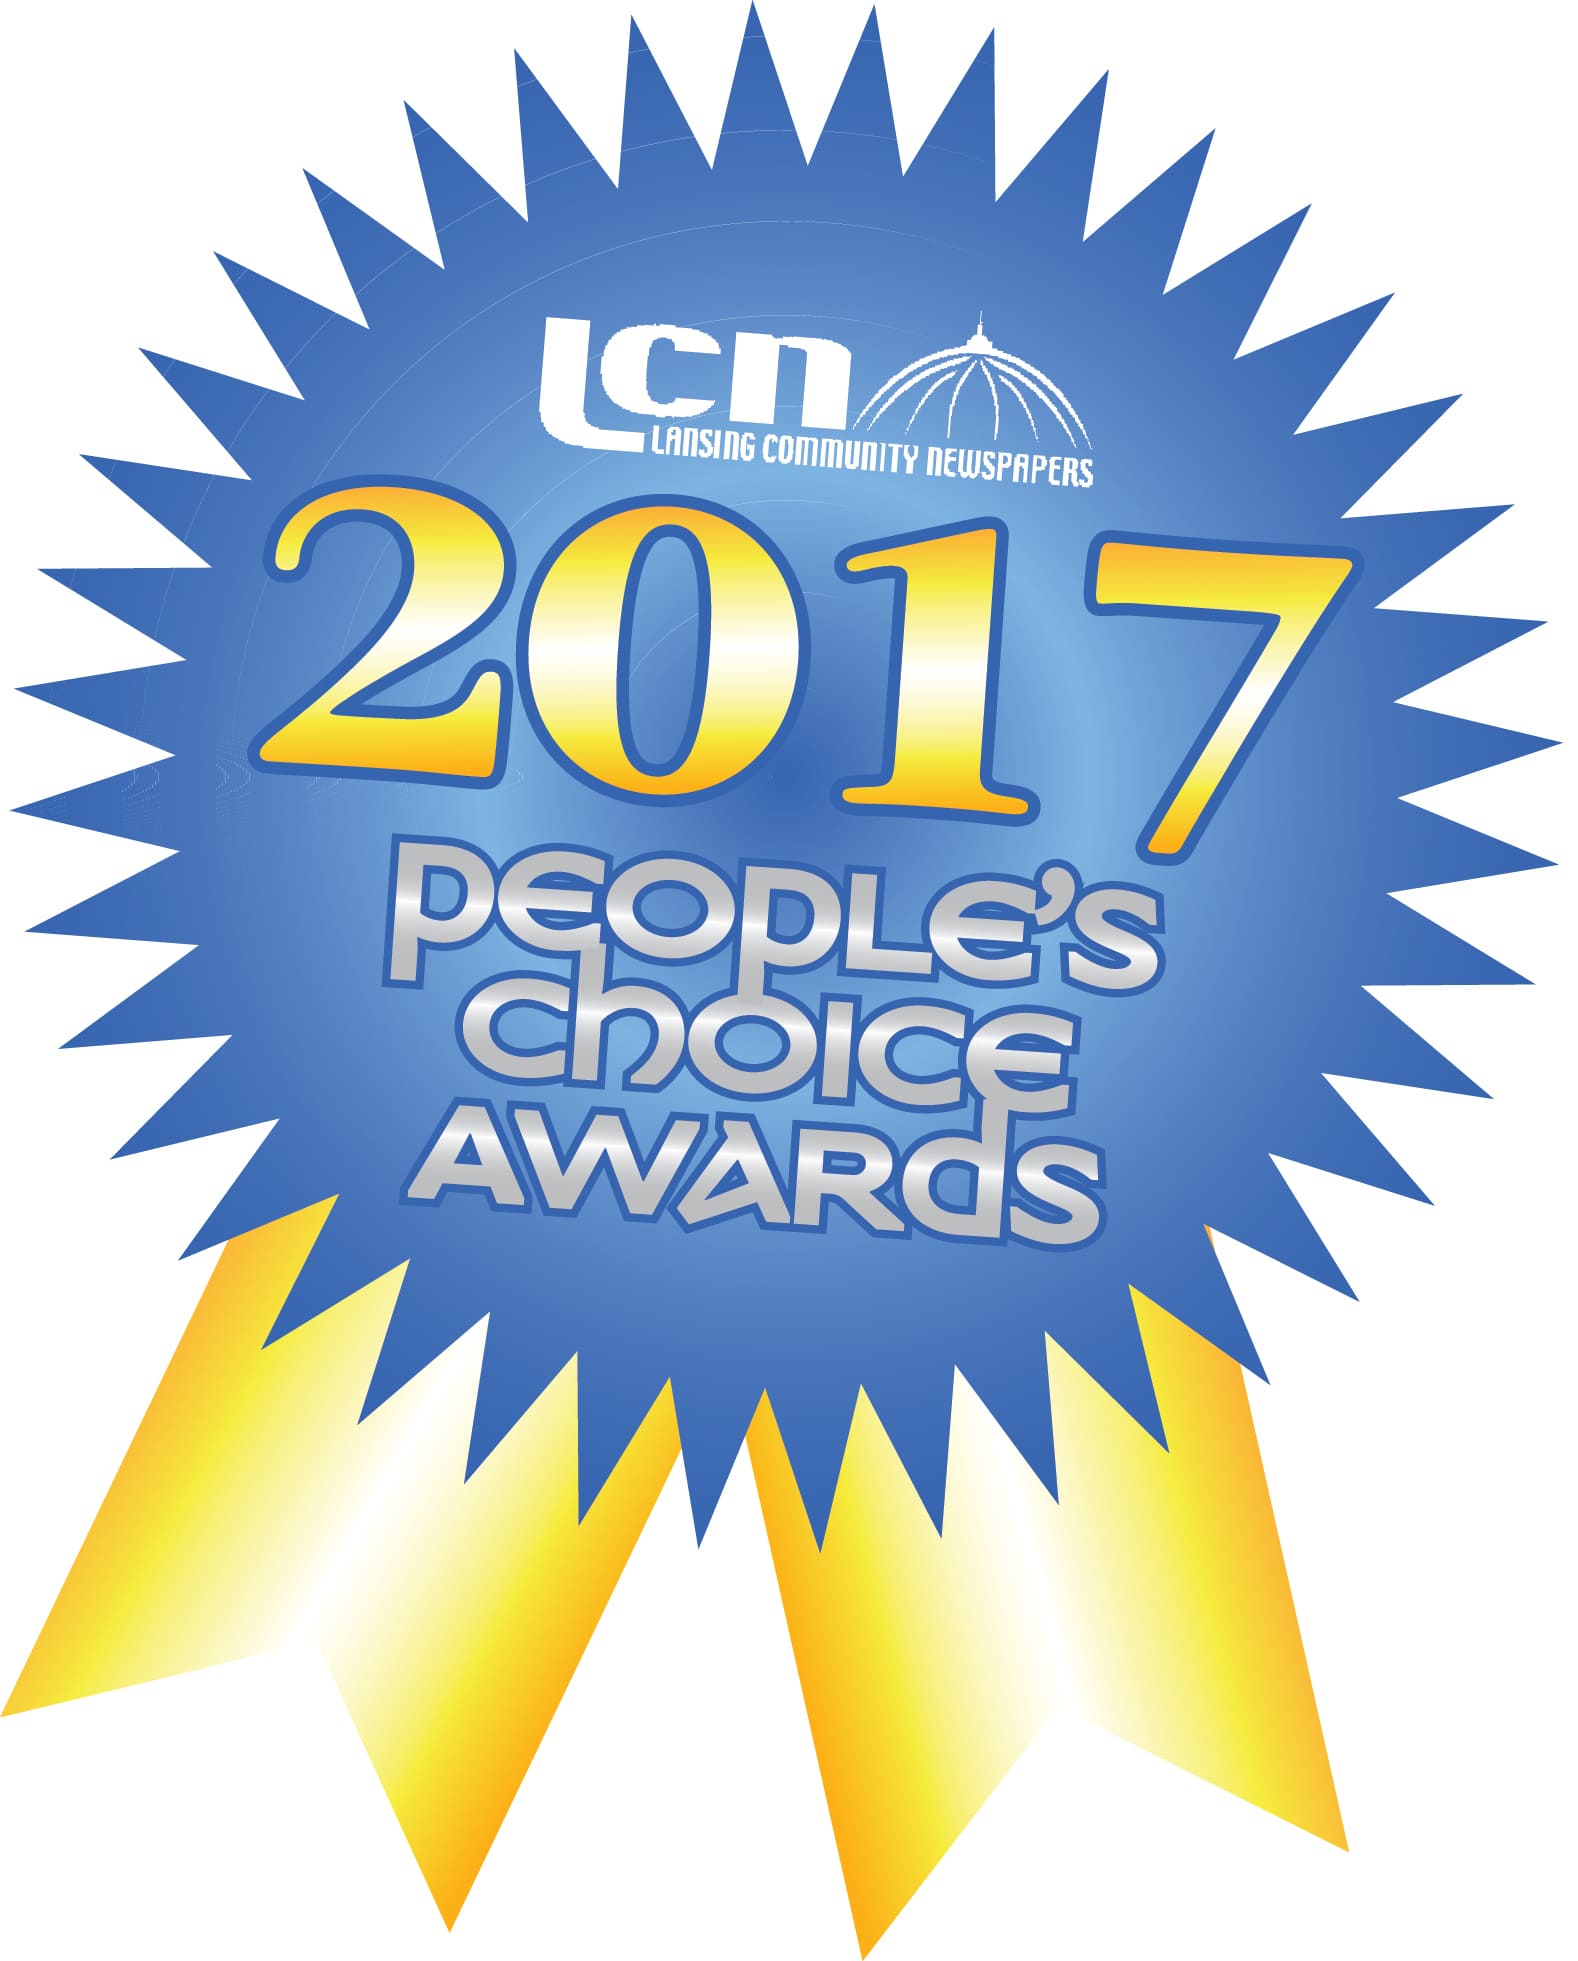 Why We Won the LCN 2017 People's Choice Awards